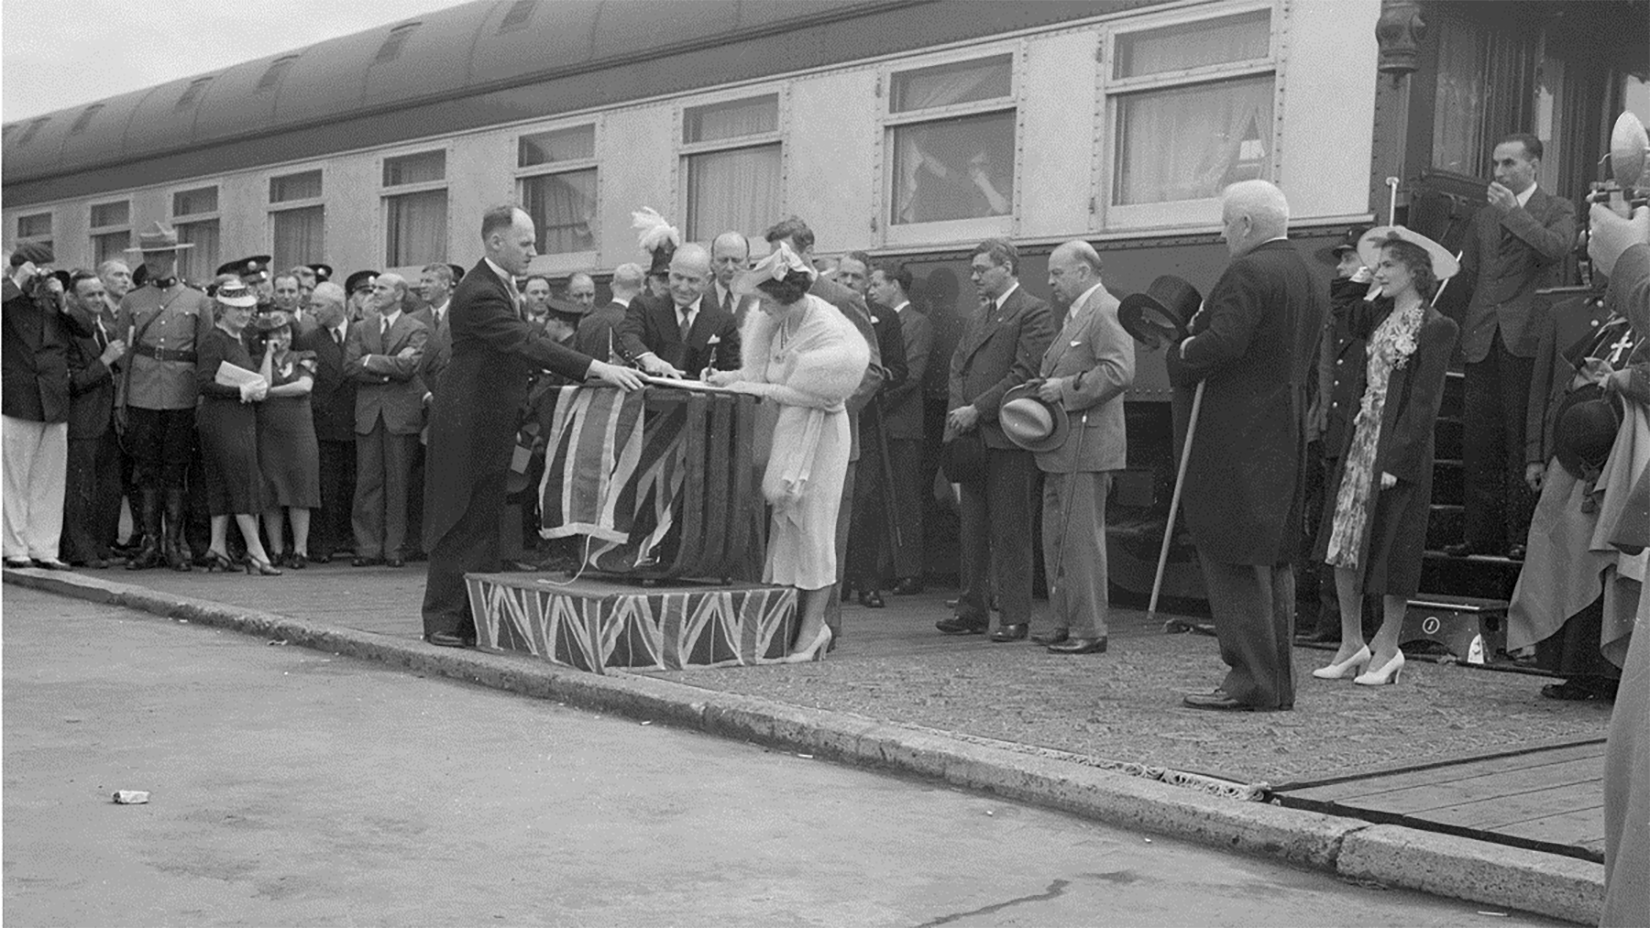 A crowd watching a woman sign a document at a podium in front of a train.